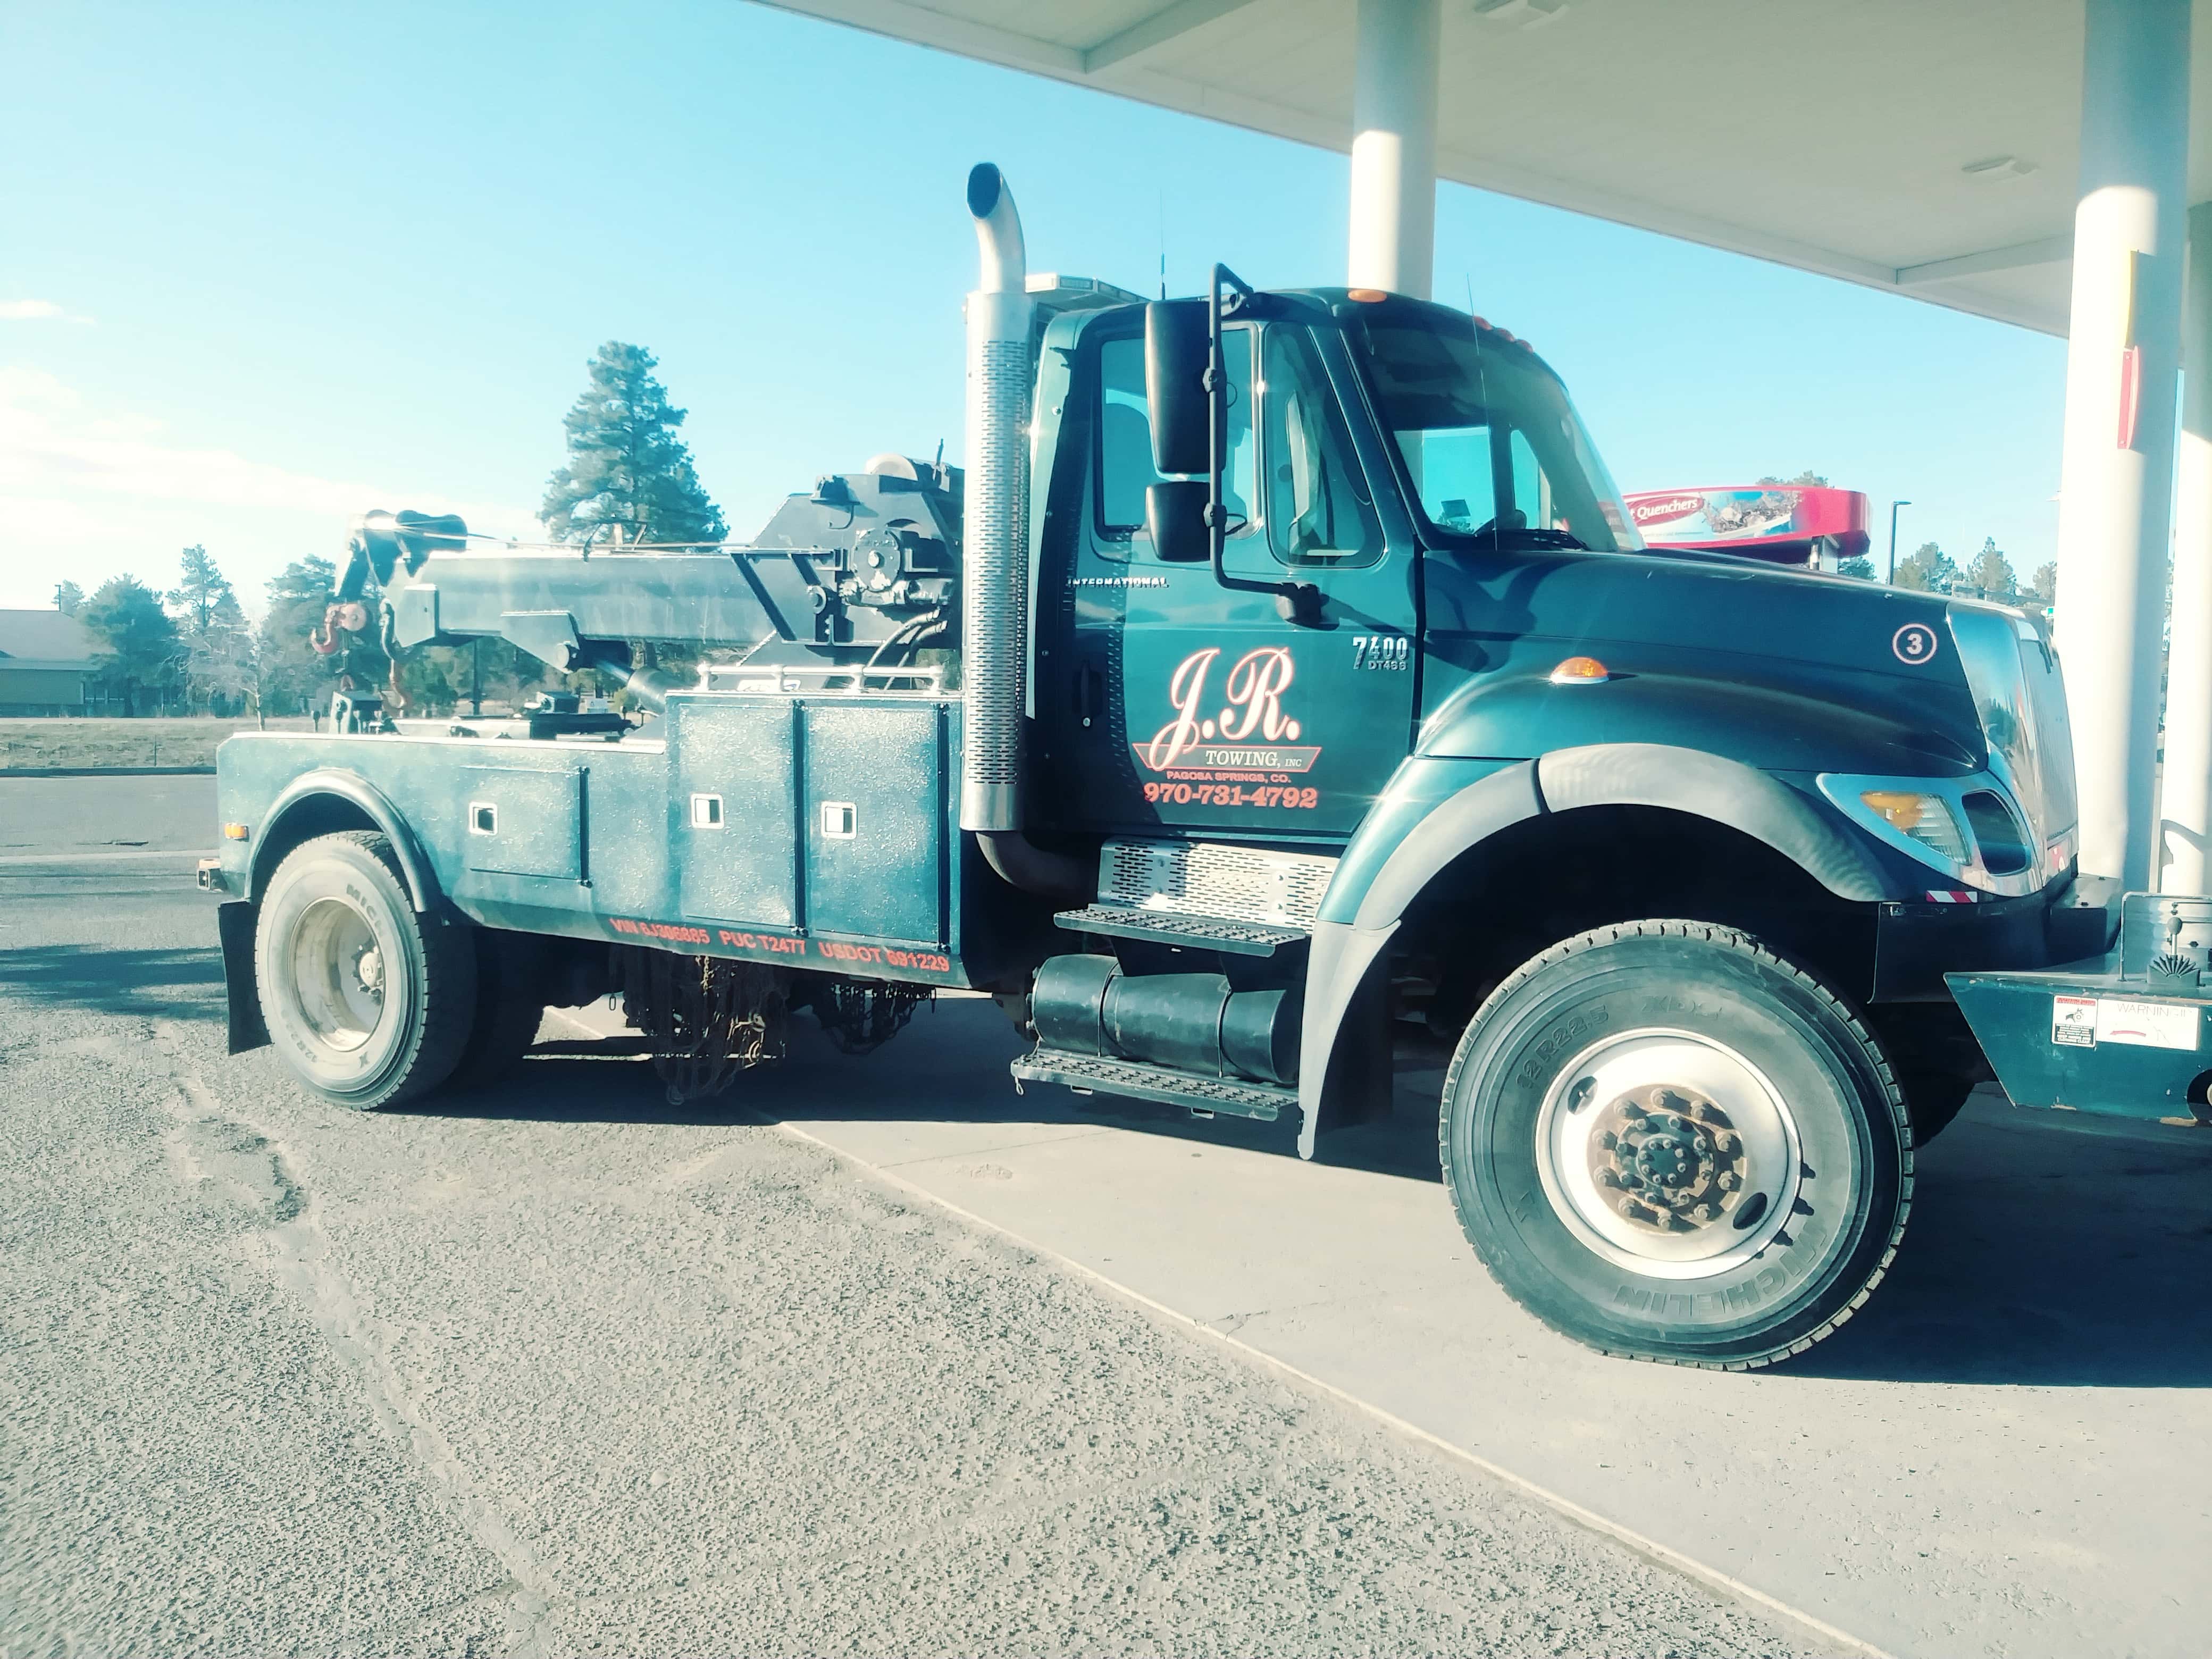 JR Towing - Pagosa Springs, CO, US, car towing service near me